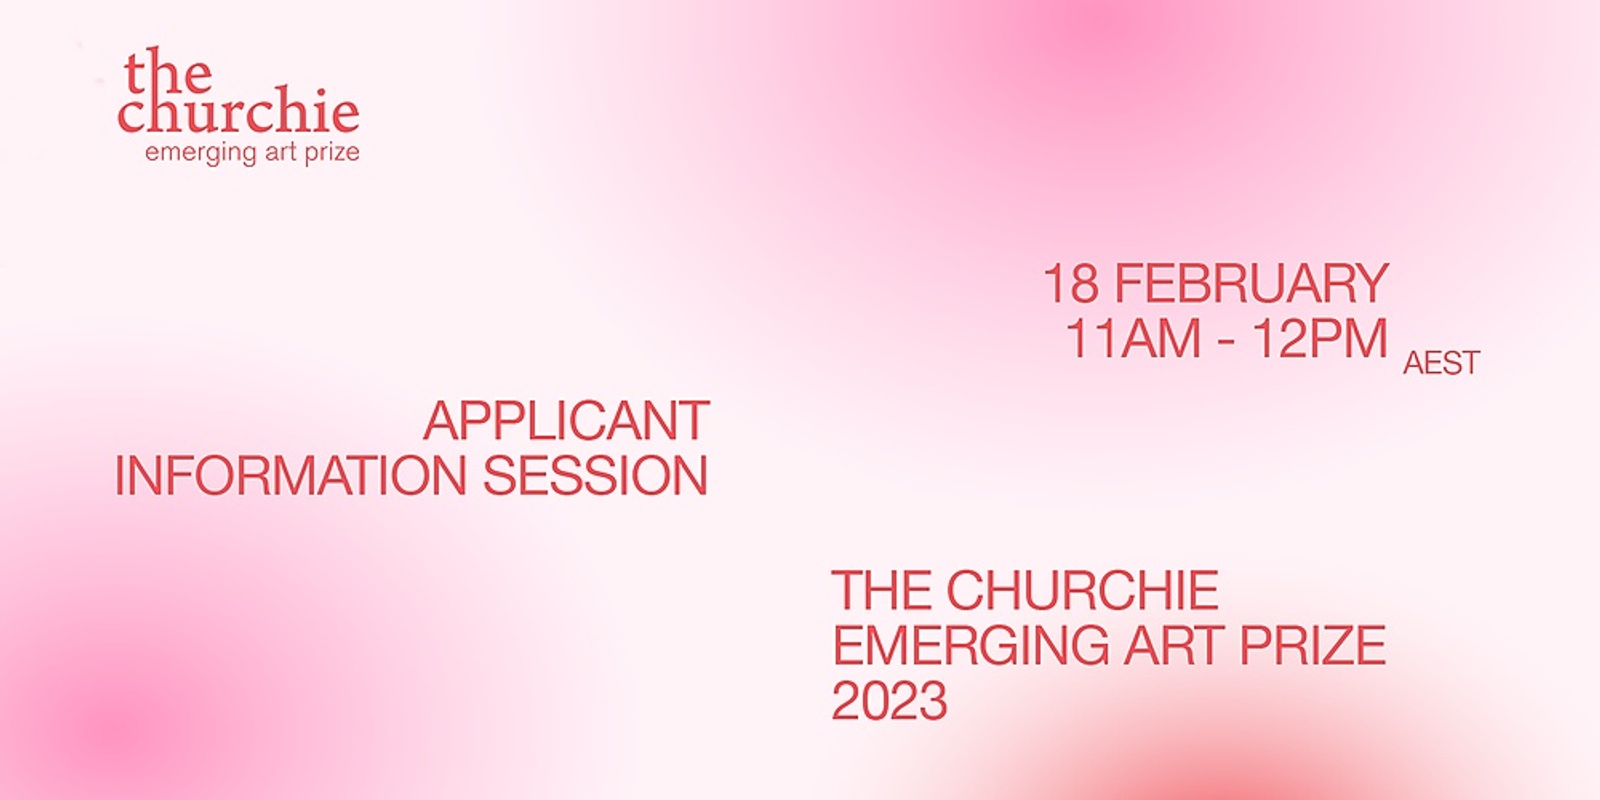 'The Churchie' Applicant Information Session